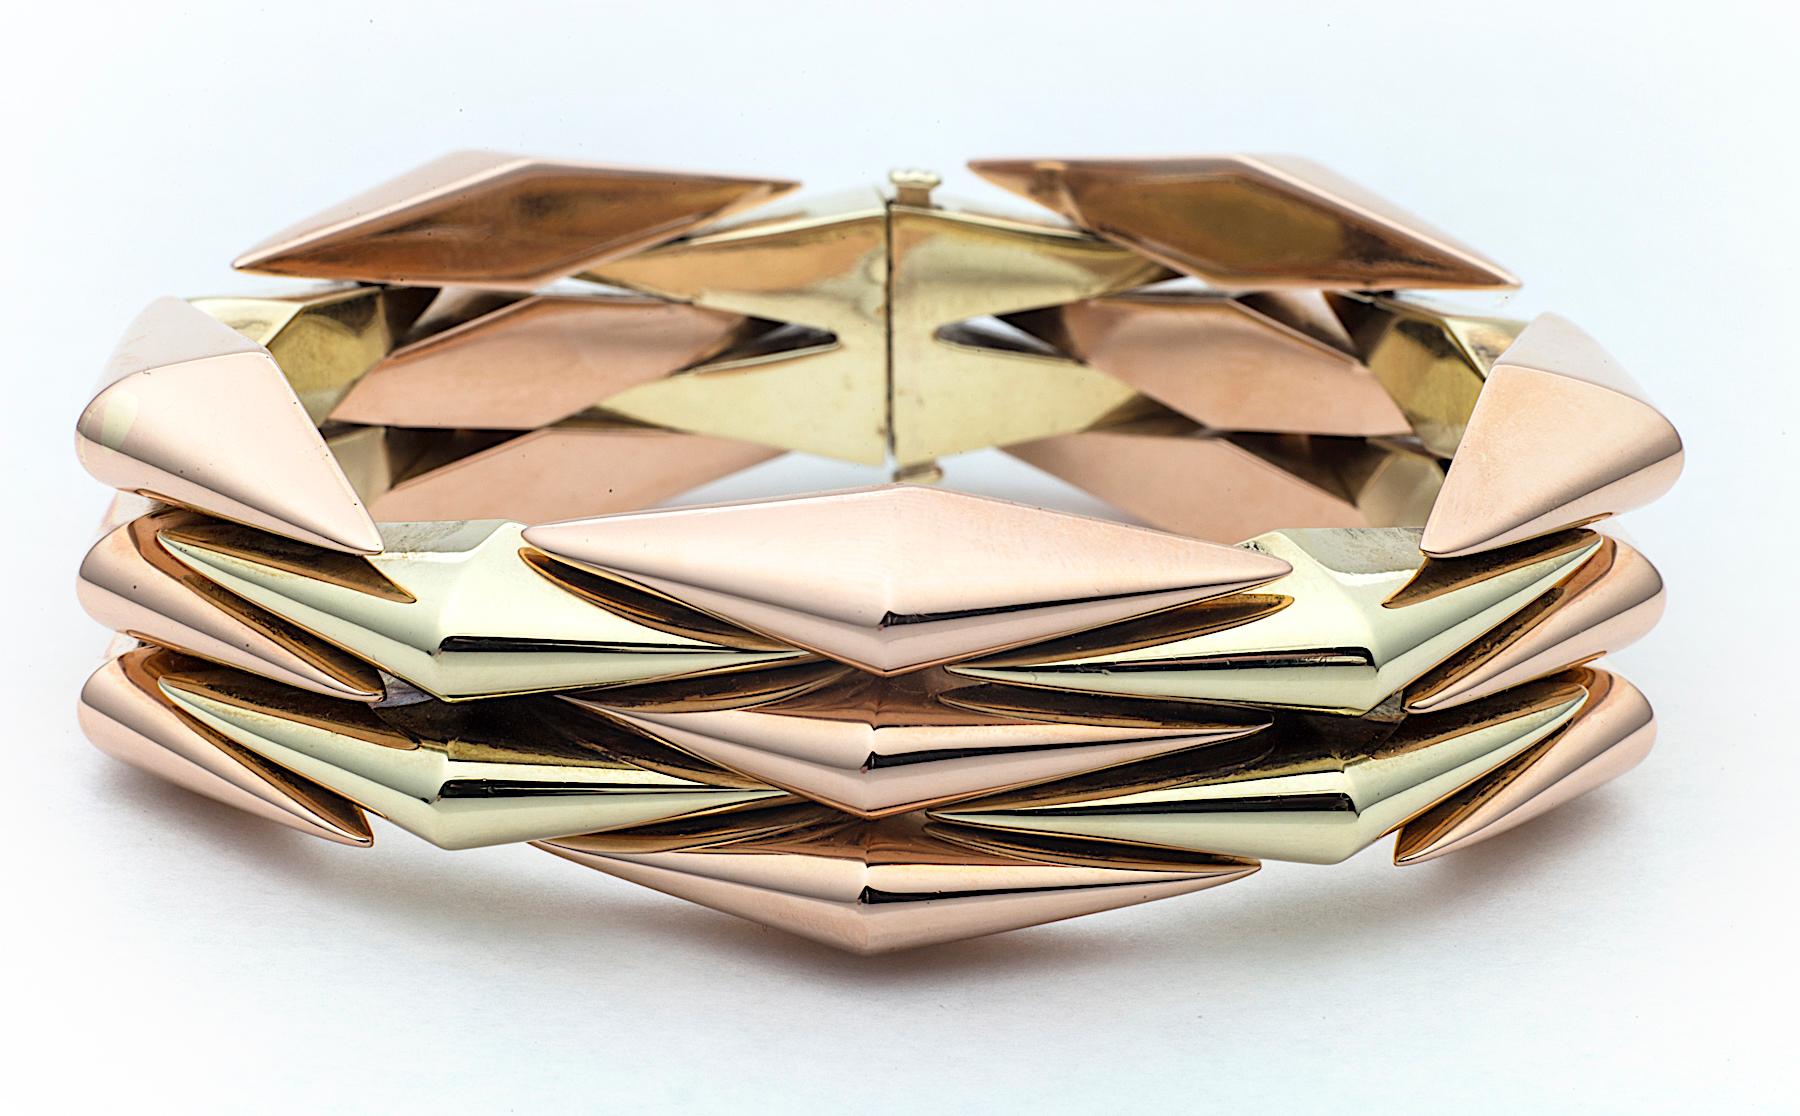 Looking sleekly architectural and crisply modern, this mid-century machine age bracelet, circa 1945, has a fresh design that is one-of-a-kind.  With connecting and moveable triangular links of alternating 14 karat rose and yellow gold, it is a